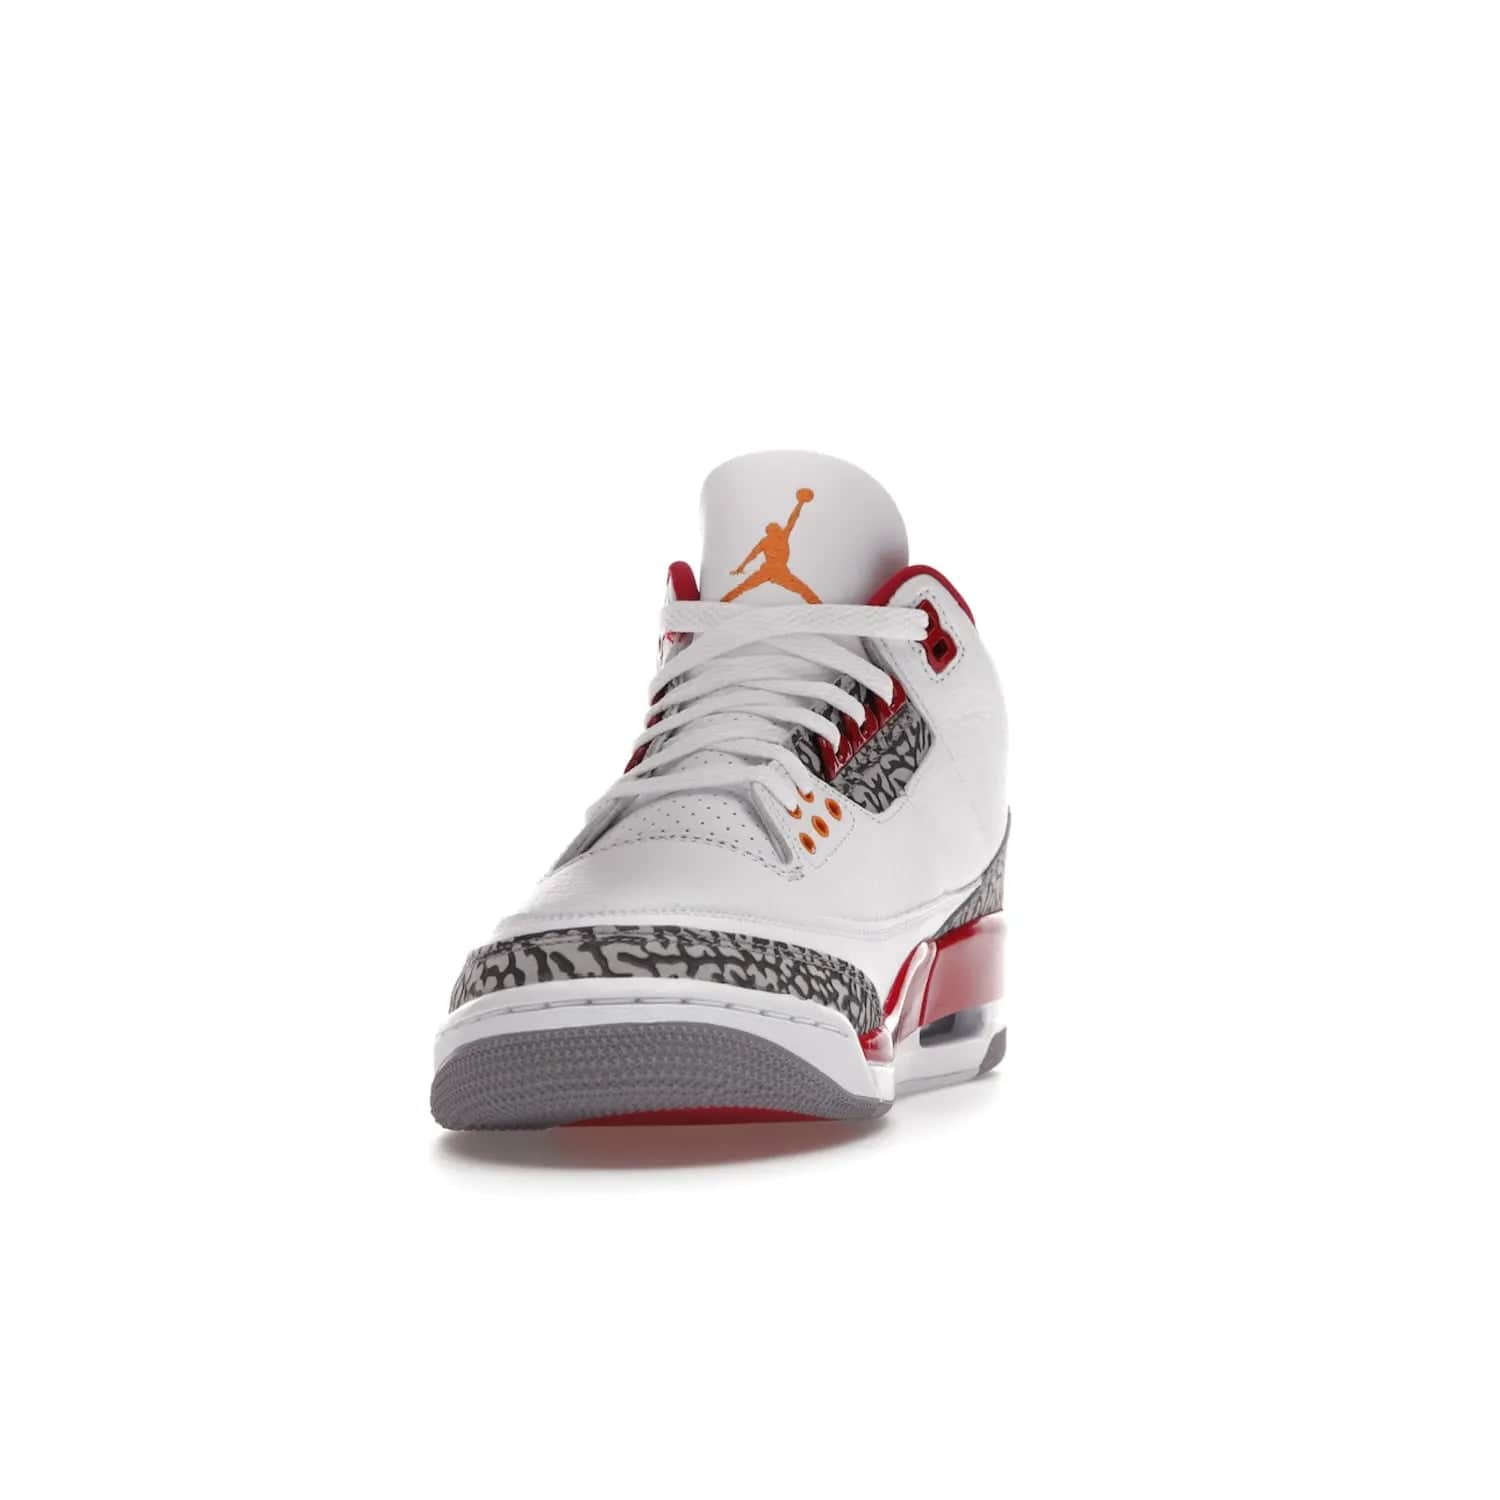 Jordan 3 Retro Cardinal Red - Image 12 - Only at www.BallersClubKickz.com - Air Jordan 3 Retro Cardinal Red combines classic style and modern appeal - white tumbled leather, signature Elephant Print overlays, cardinal red midsoles, Jumpman logo embroidery. Available Feb 2022.